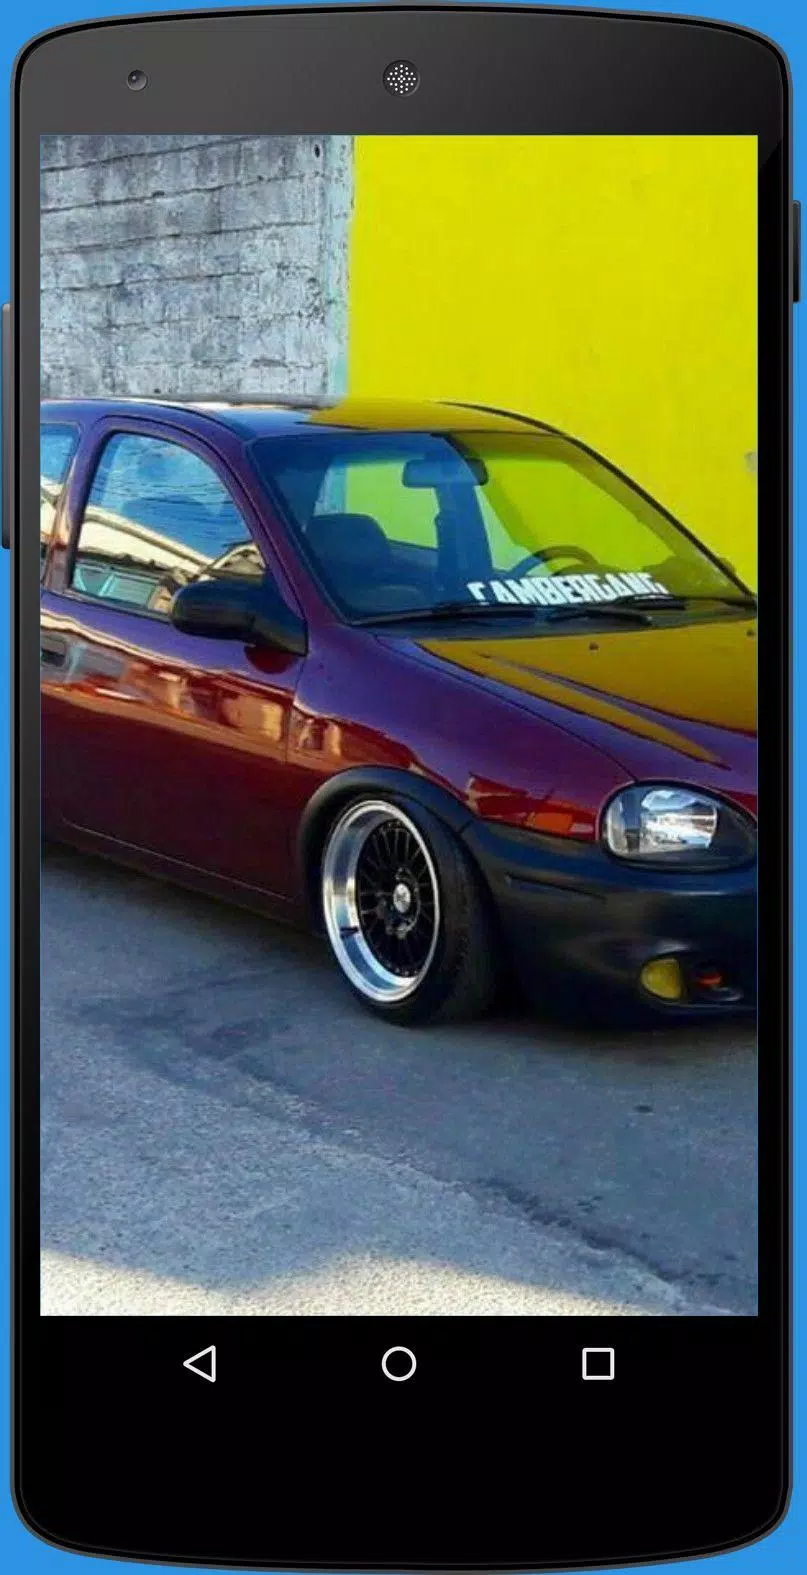 Modified Opel Corsa Wallpapers for Android - APK Download